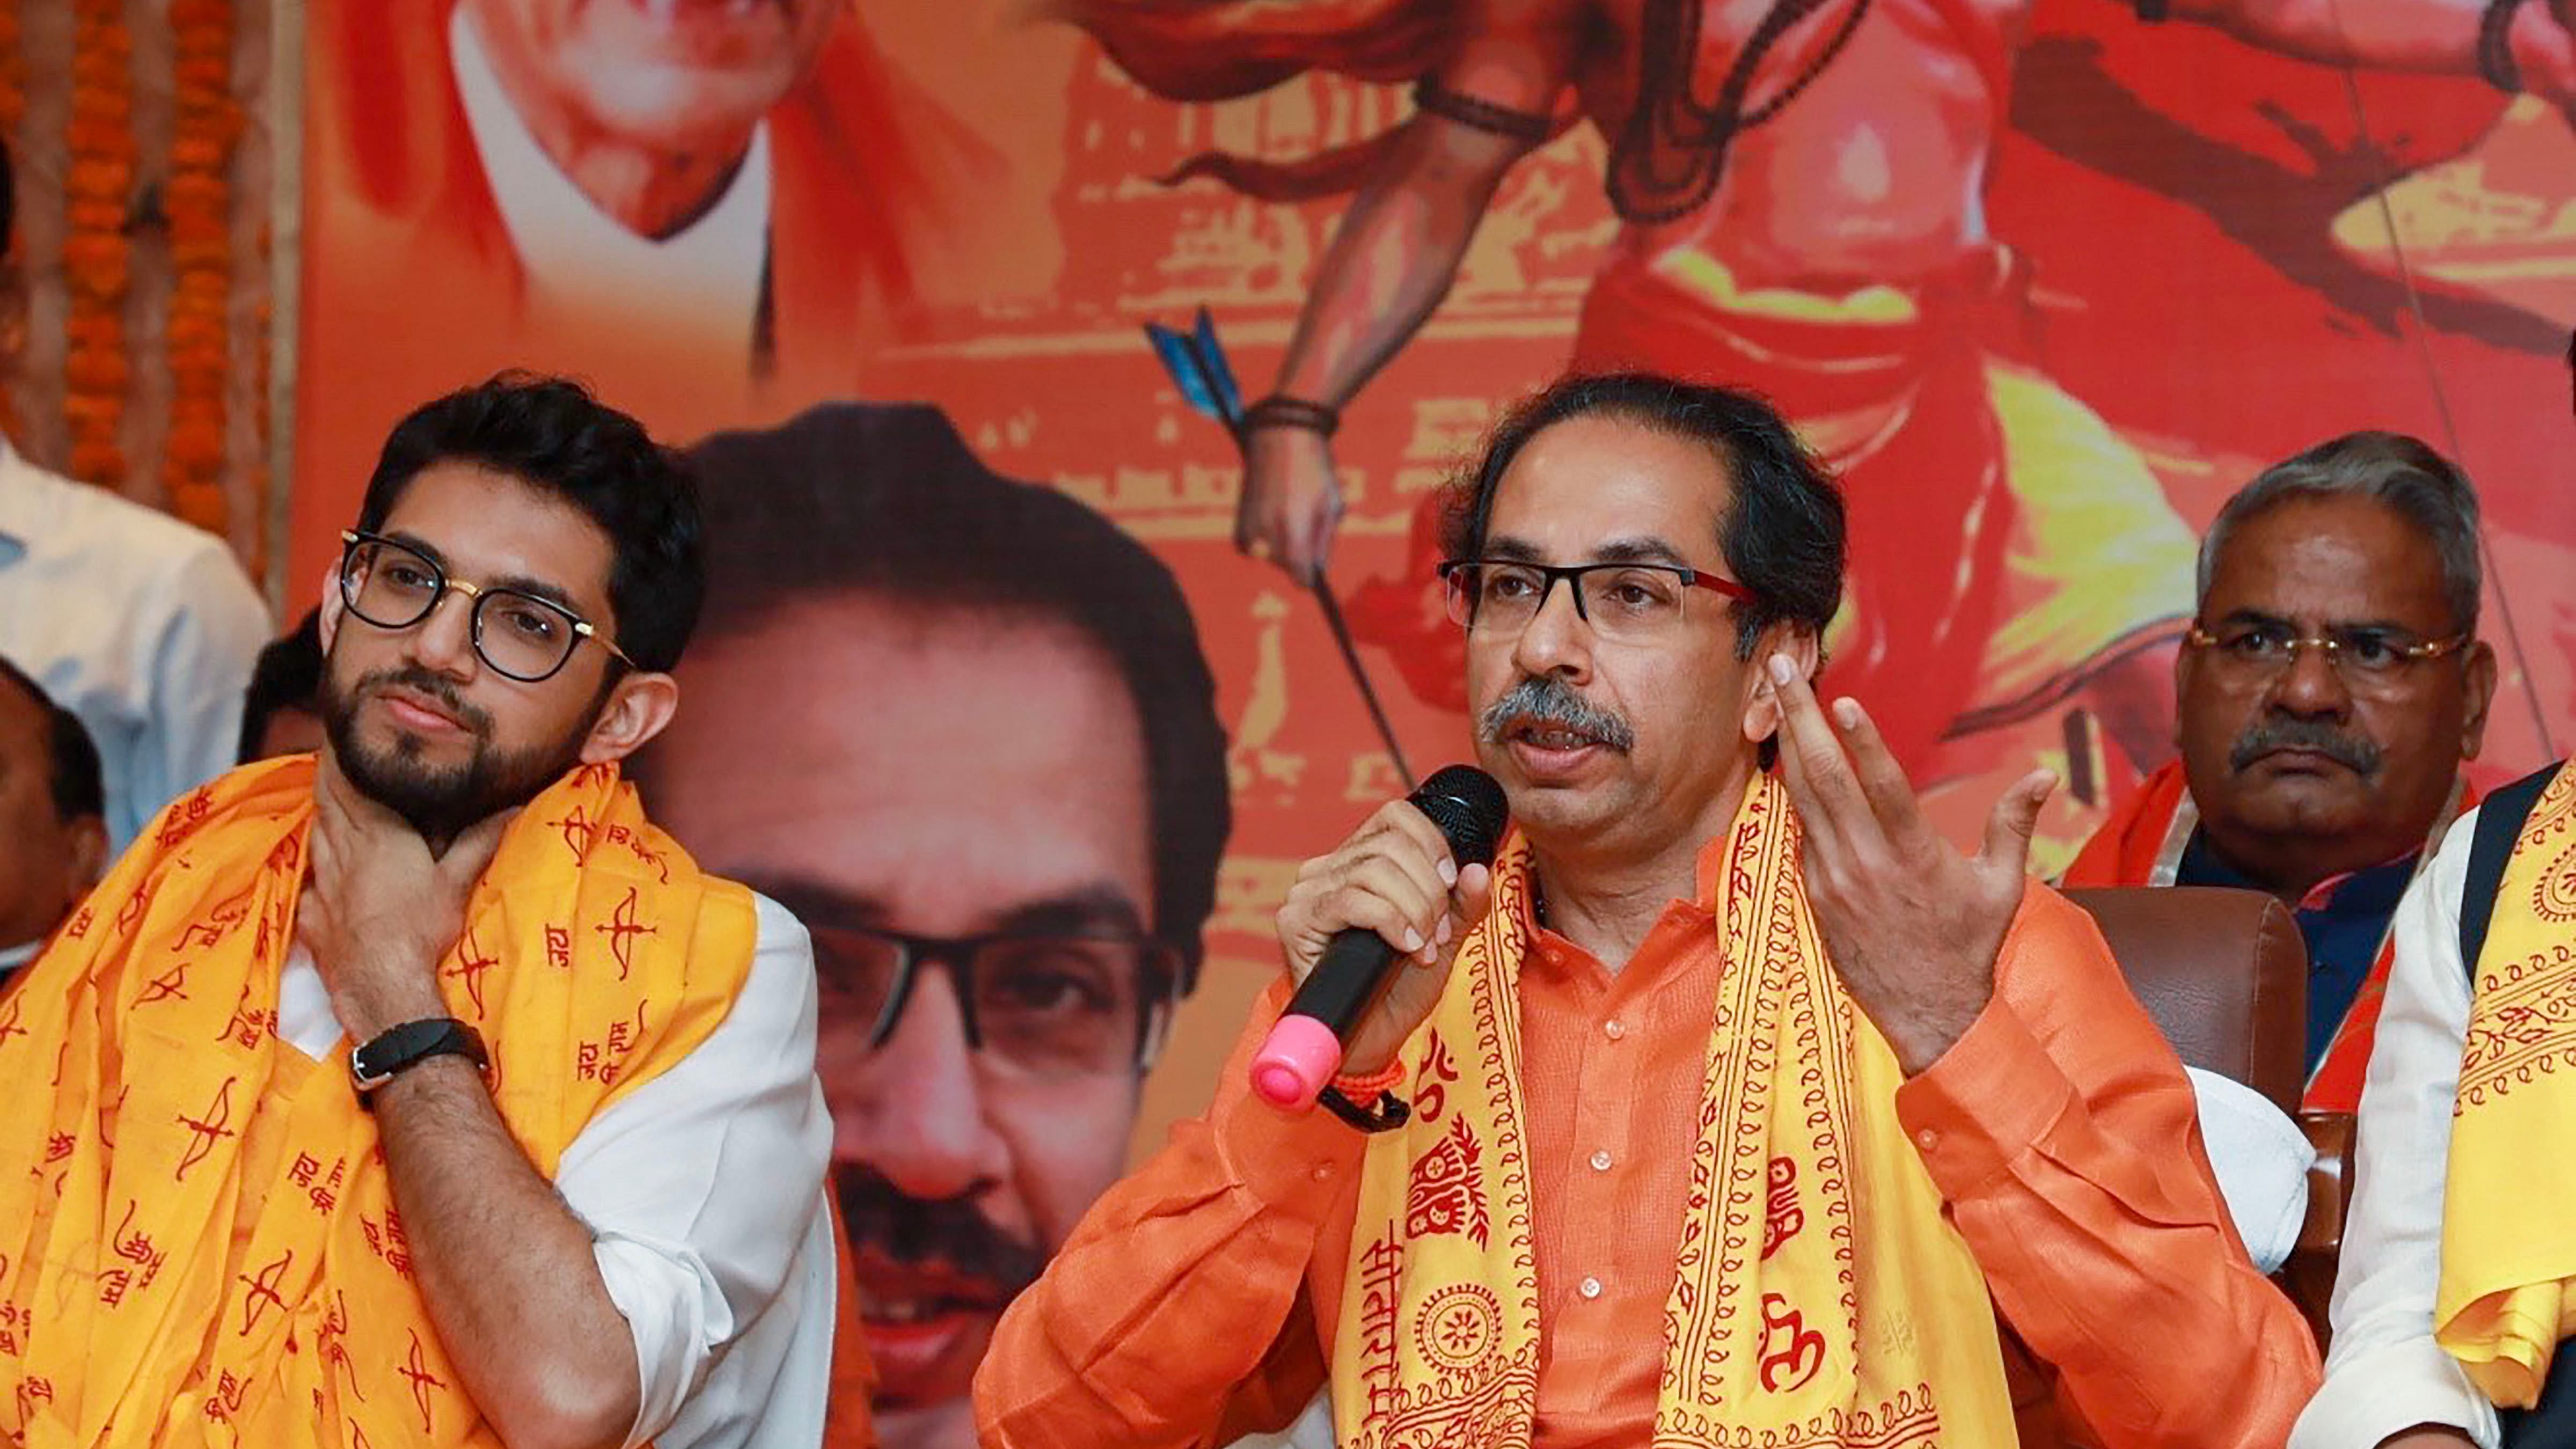 The BJP which remains restless because of the Shiv Sena unforgivable dare of breaking ties and joining hands with diametrically opposite Congress-NCP combine - a political jawdropper by any standards. Credit: PTI Photo